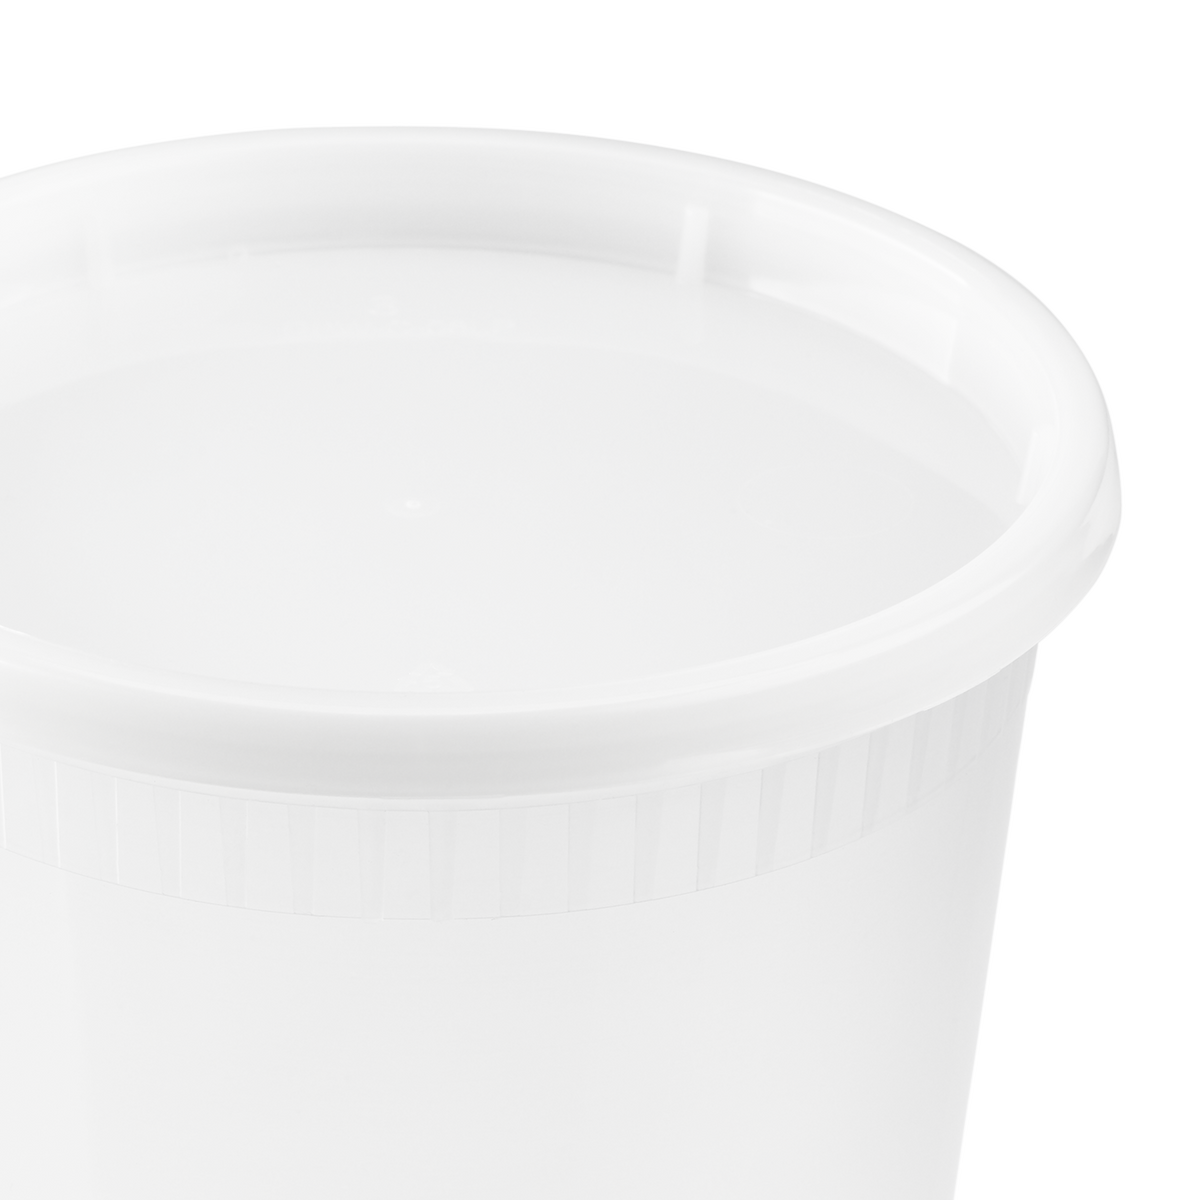 Deli Containers with Lids - 32 oz., 240 Containers/Lids